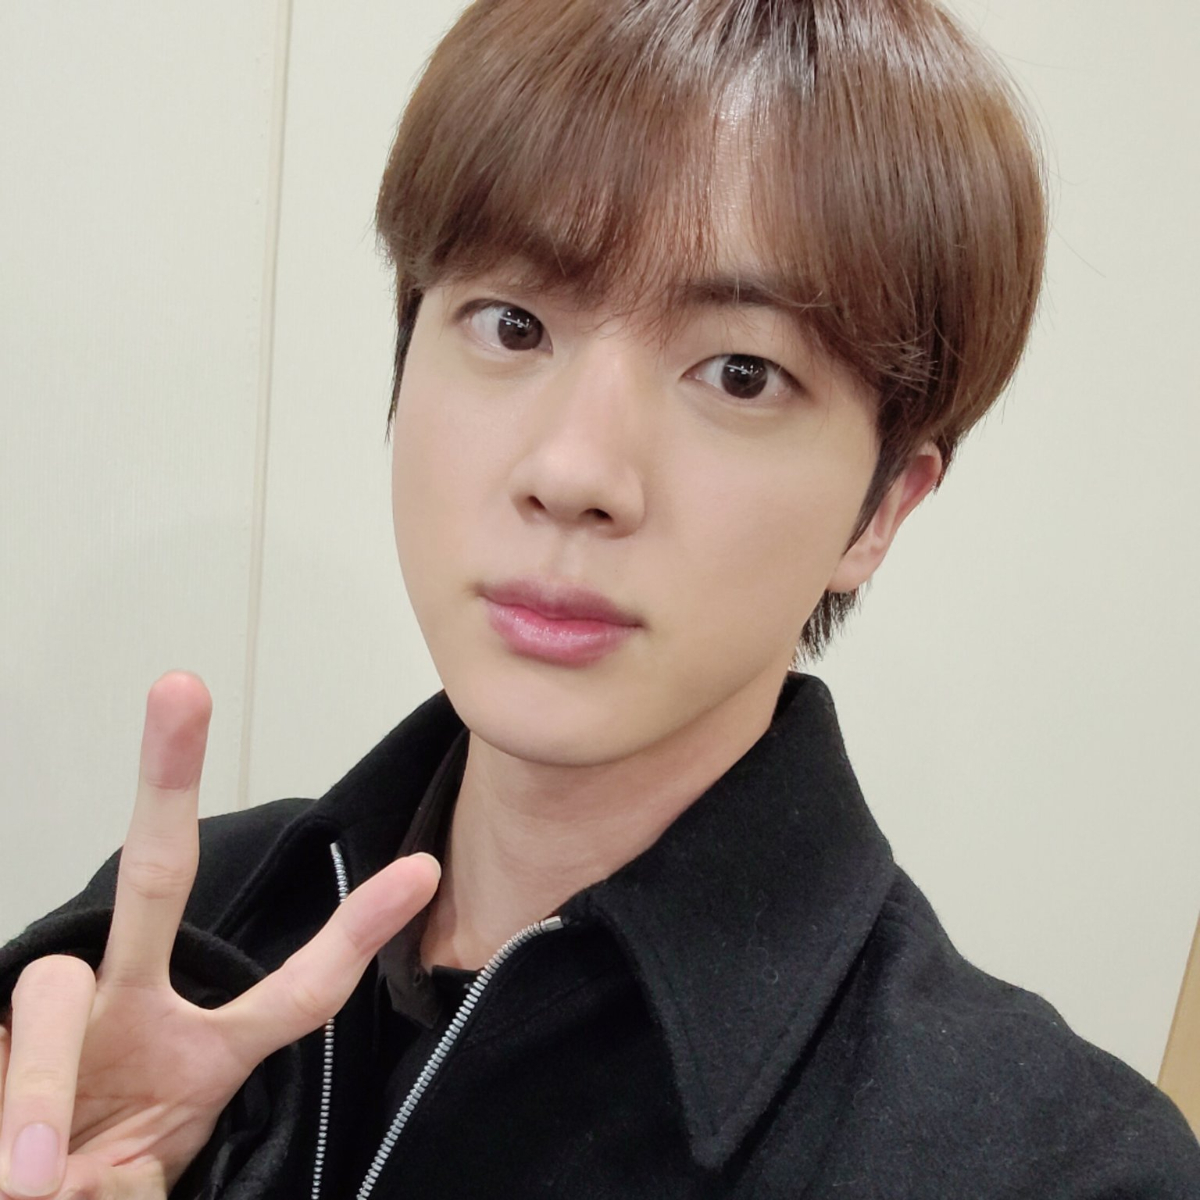 BTS' Jin REACTS to comparisons between him and Suho of True Beauty; Reveals who he thinks is more handsome